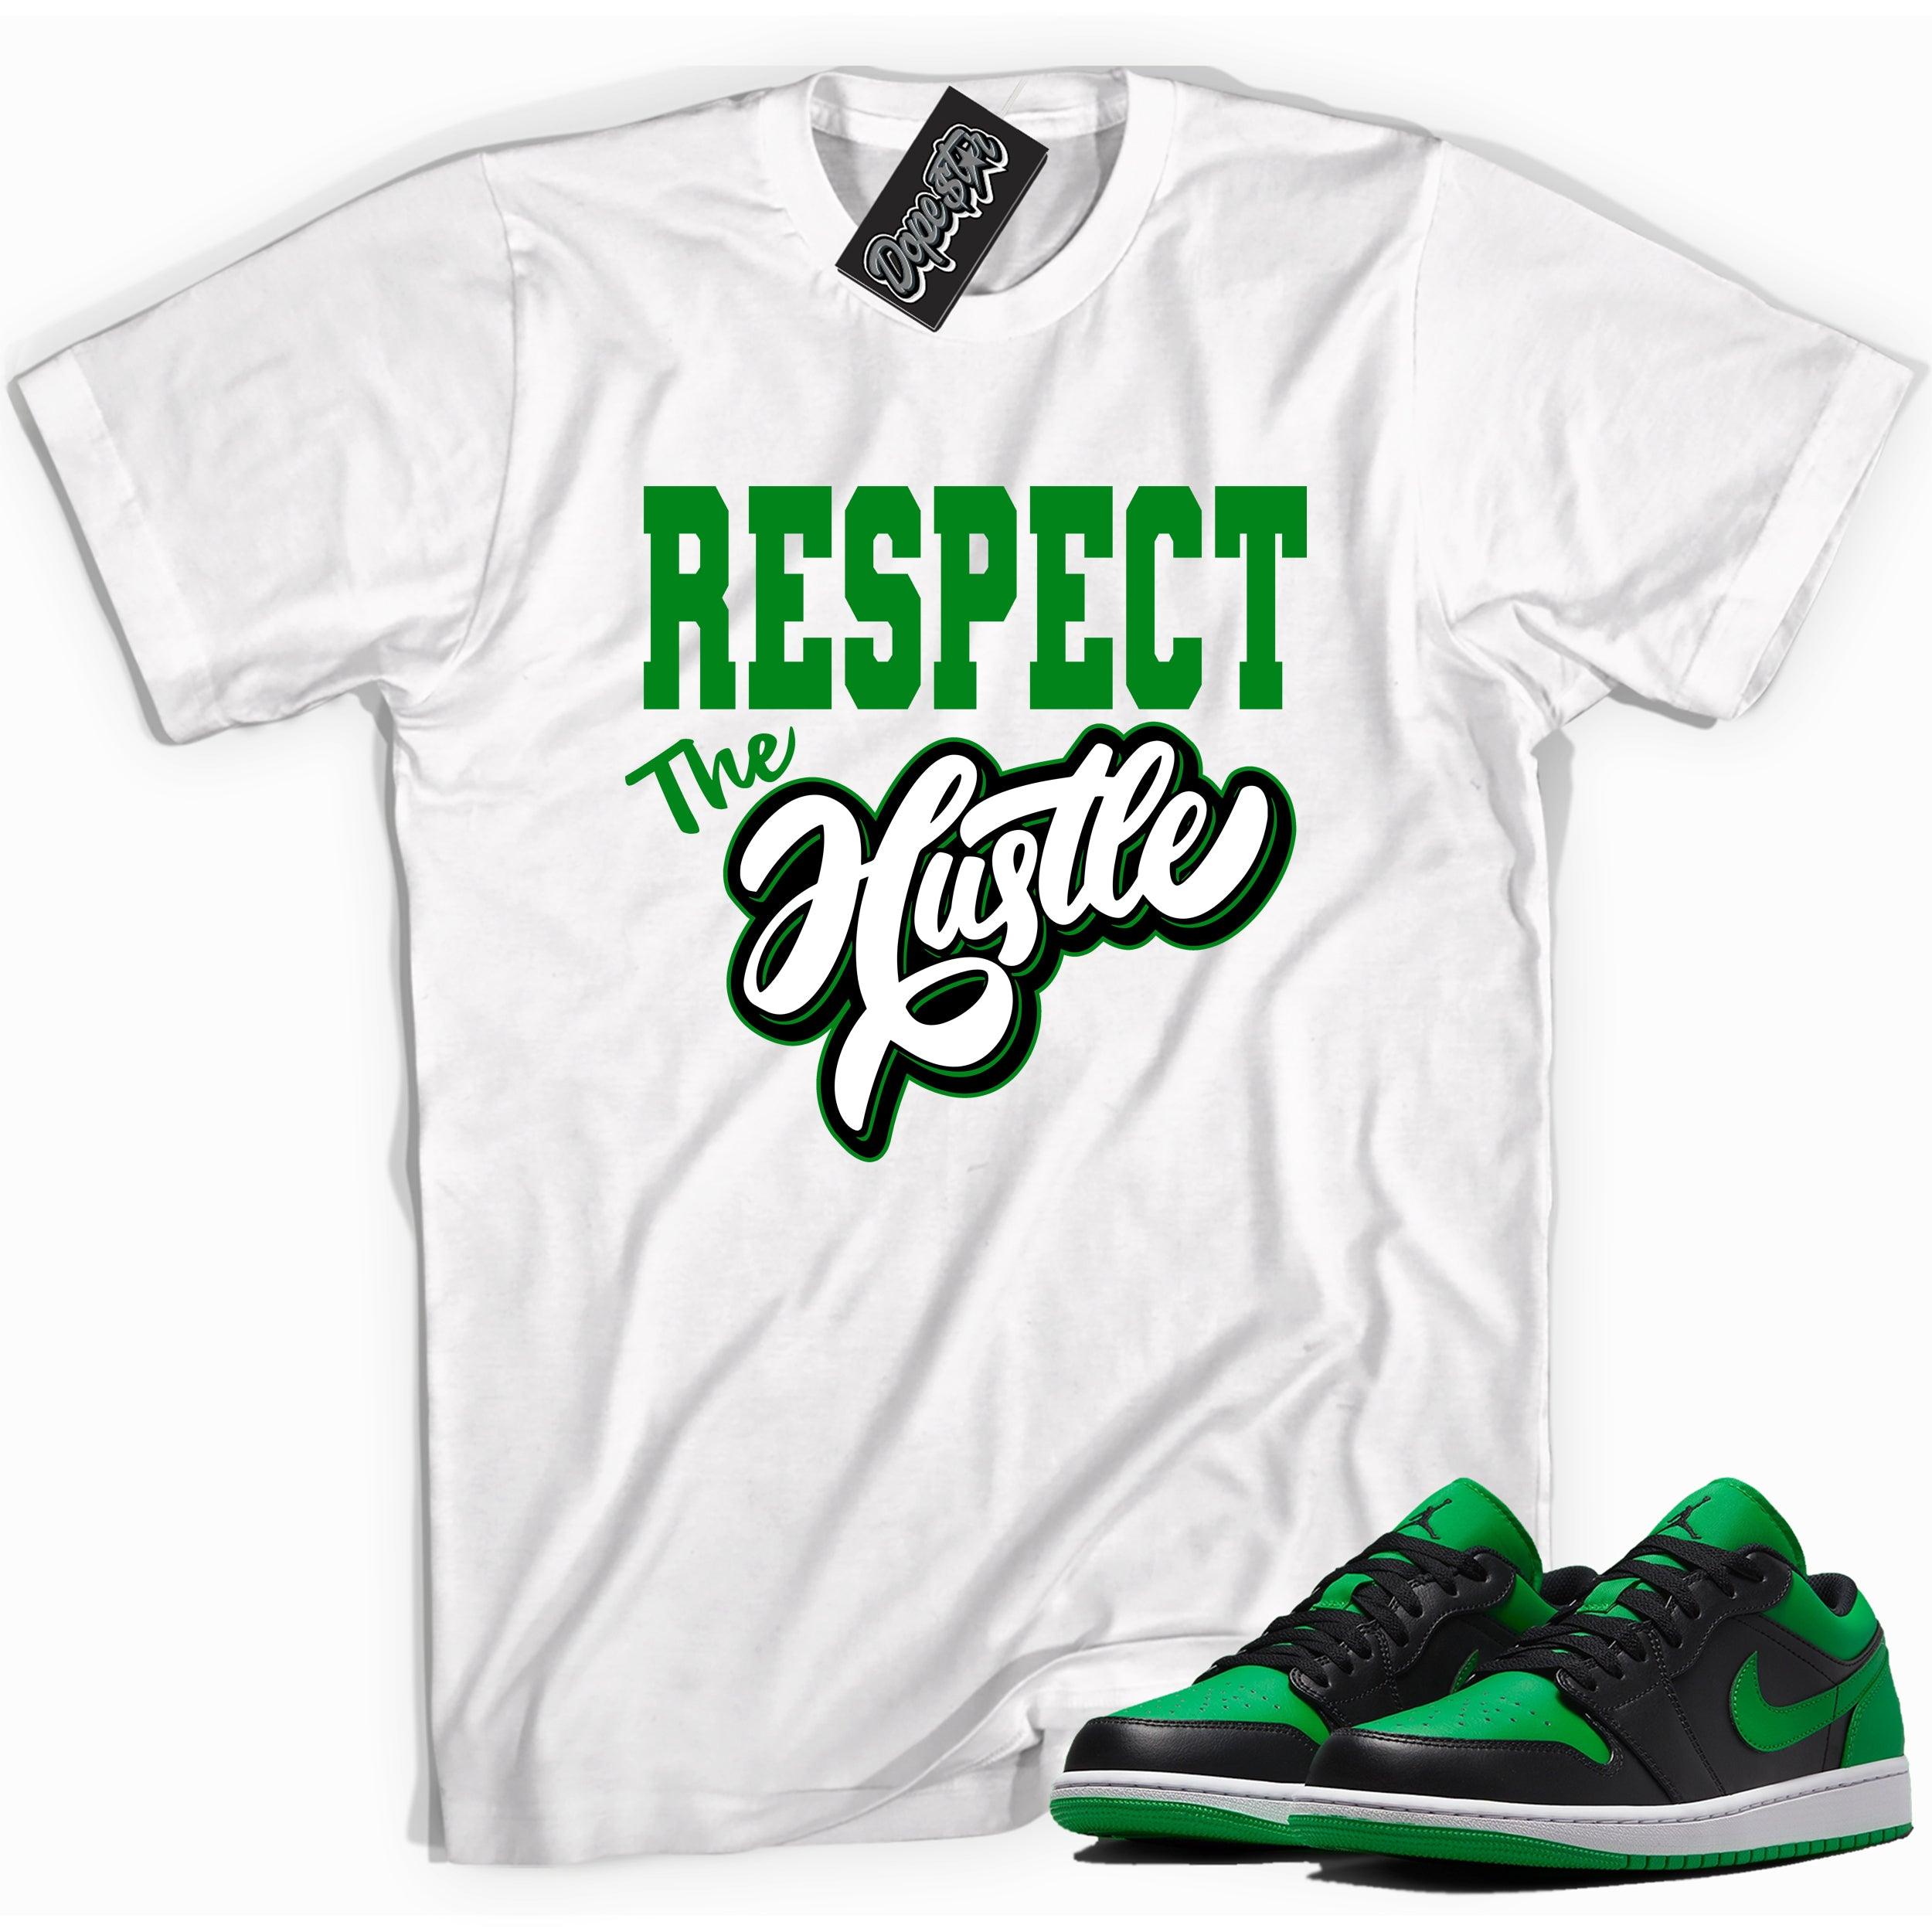 Cool white graphic tee with 'respect the hustle' print, that perfectly matches Air Jordan 1 Low Lucky Green sneakers